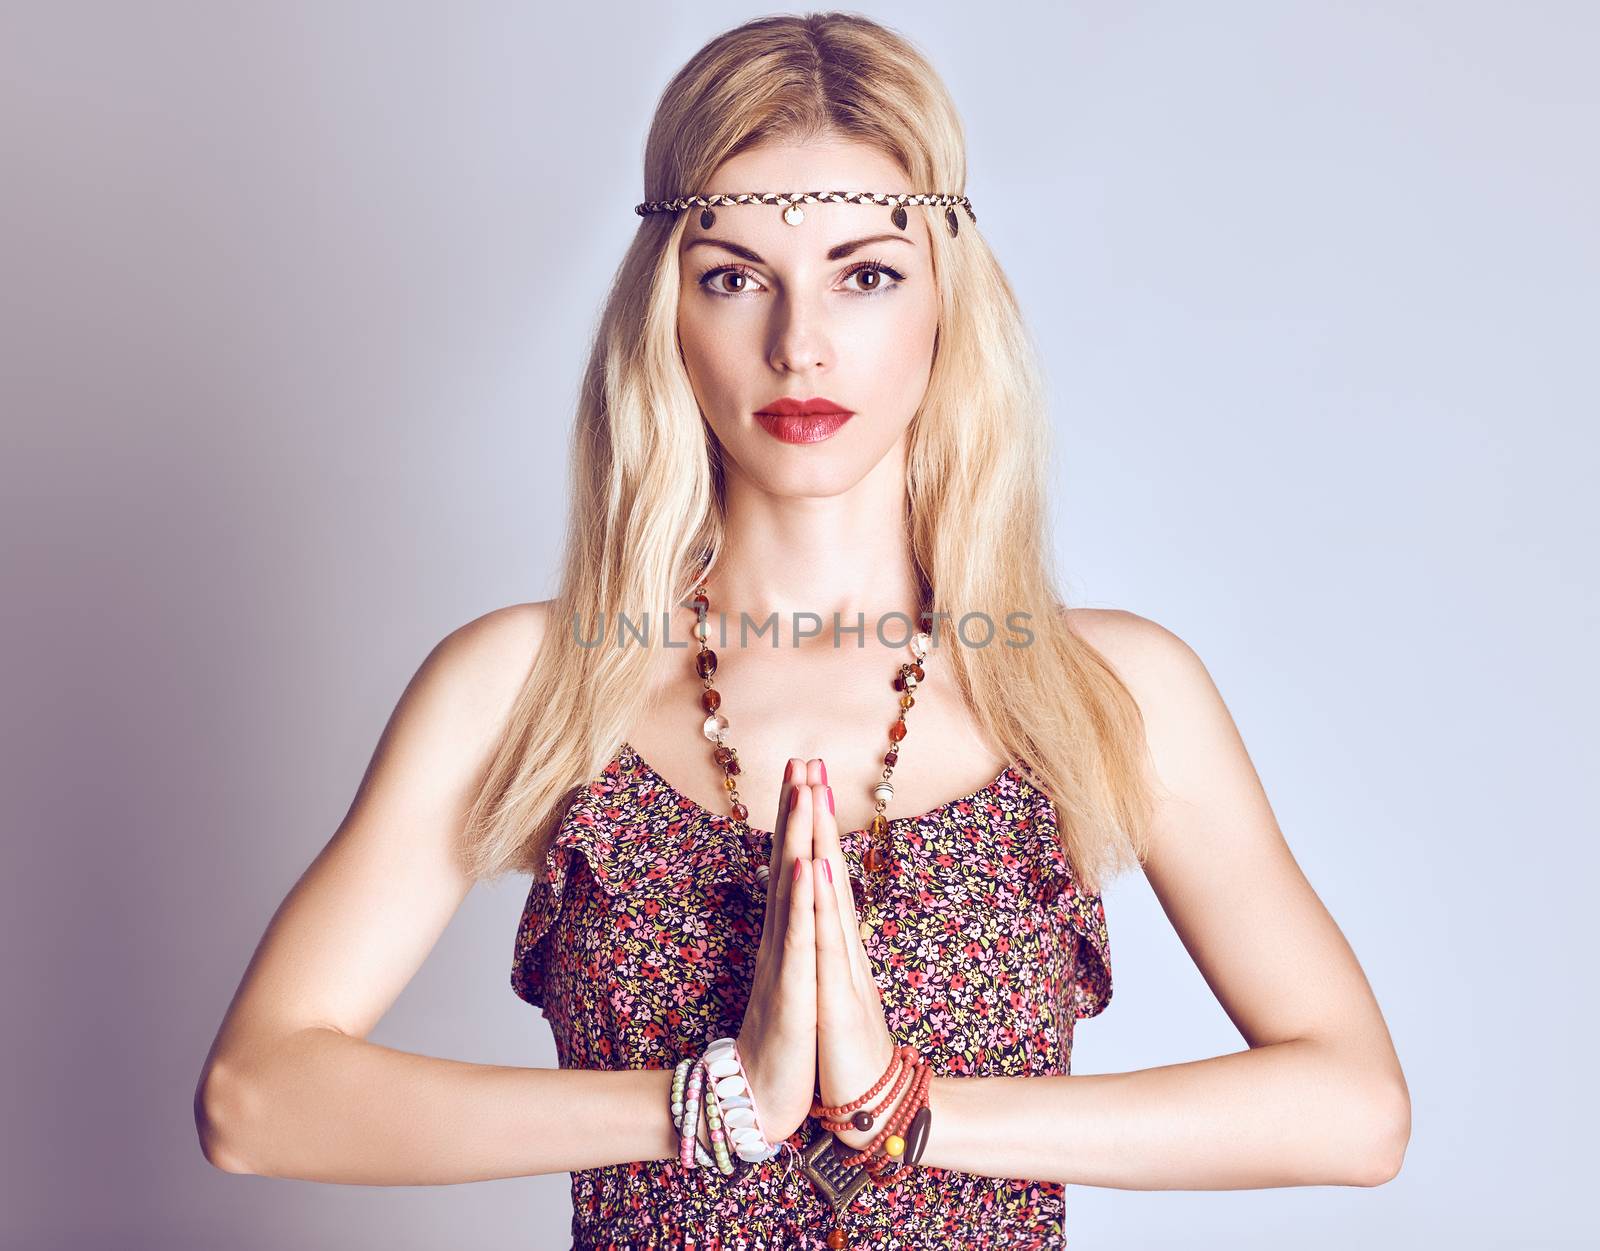 Beauty portrait woman doing yoga. Boho hippie girl meditates, enjoying calm, relax and harmony, ethnic accessories. Positive blonde, long hair in stylish floral sundress. Unusual creative, people